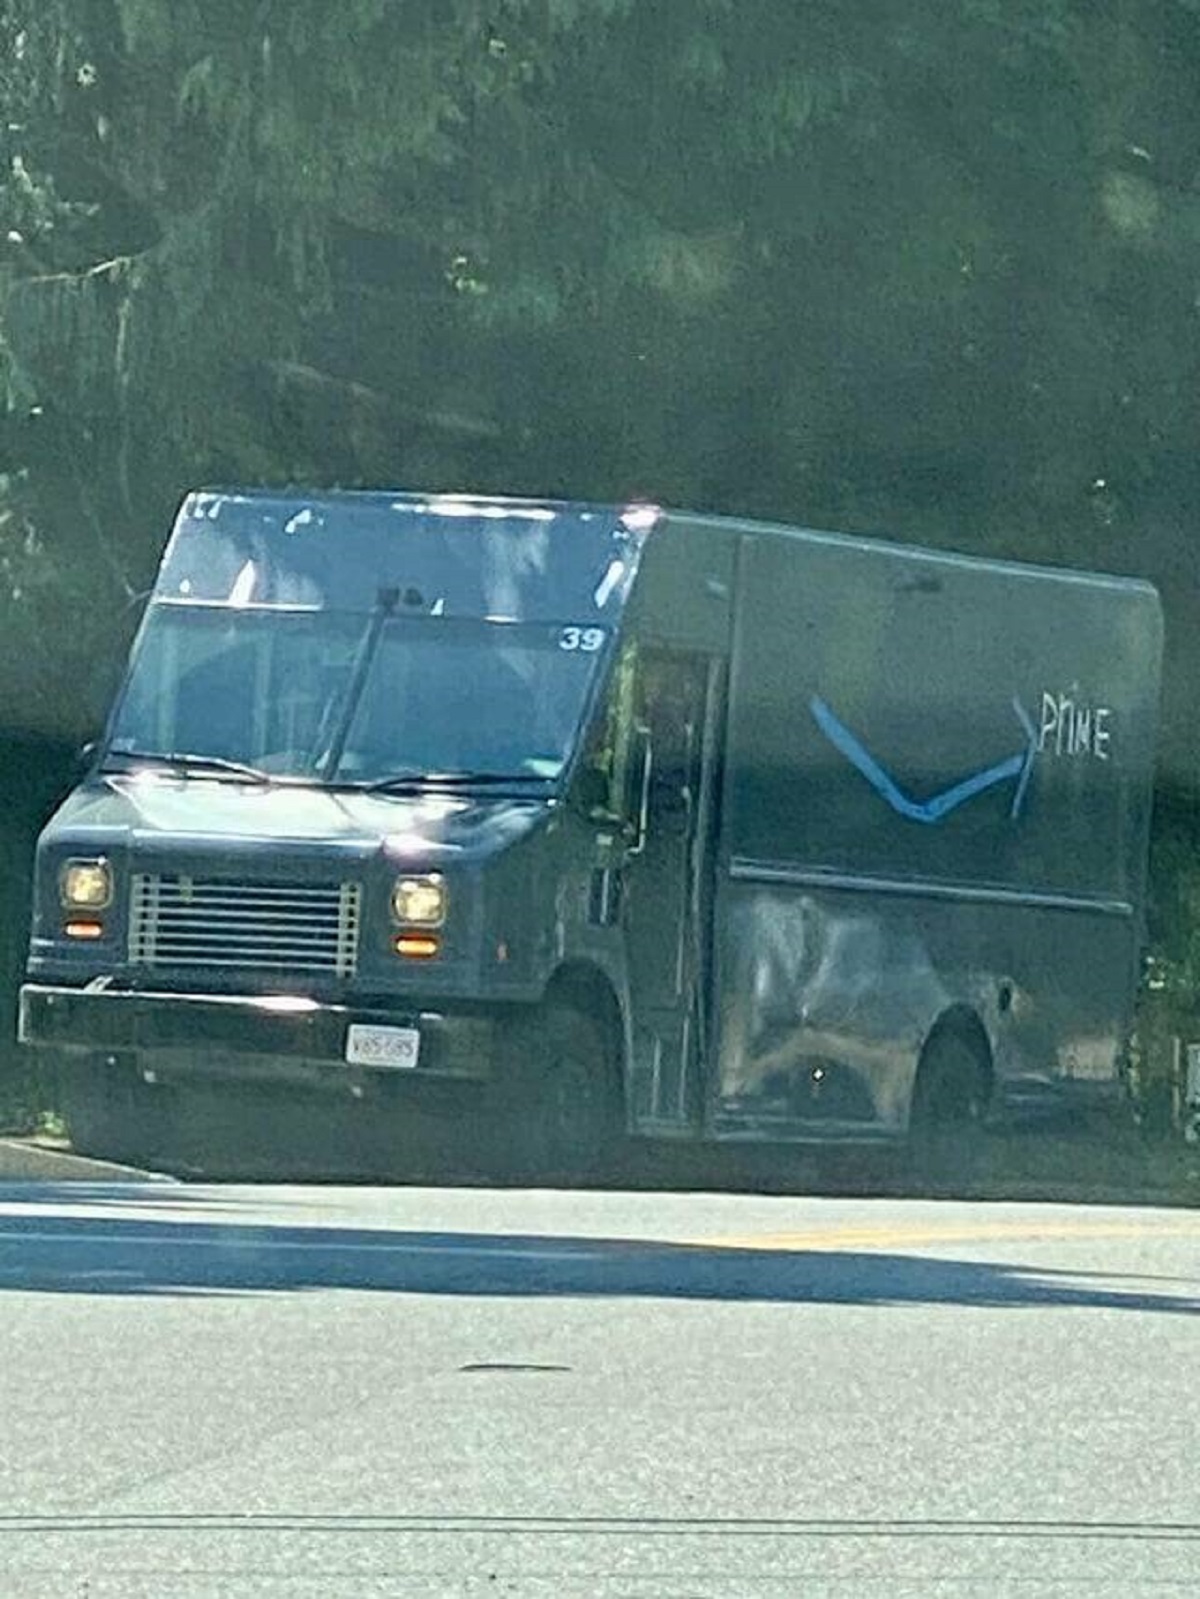 "This Amazon truck decal is made with tape"